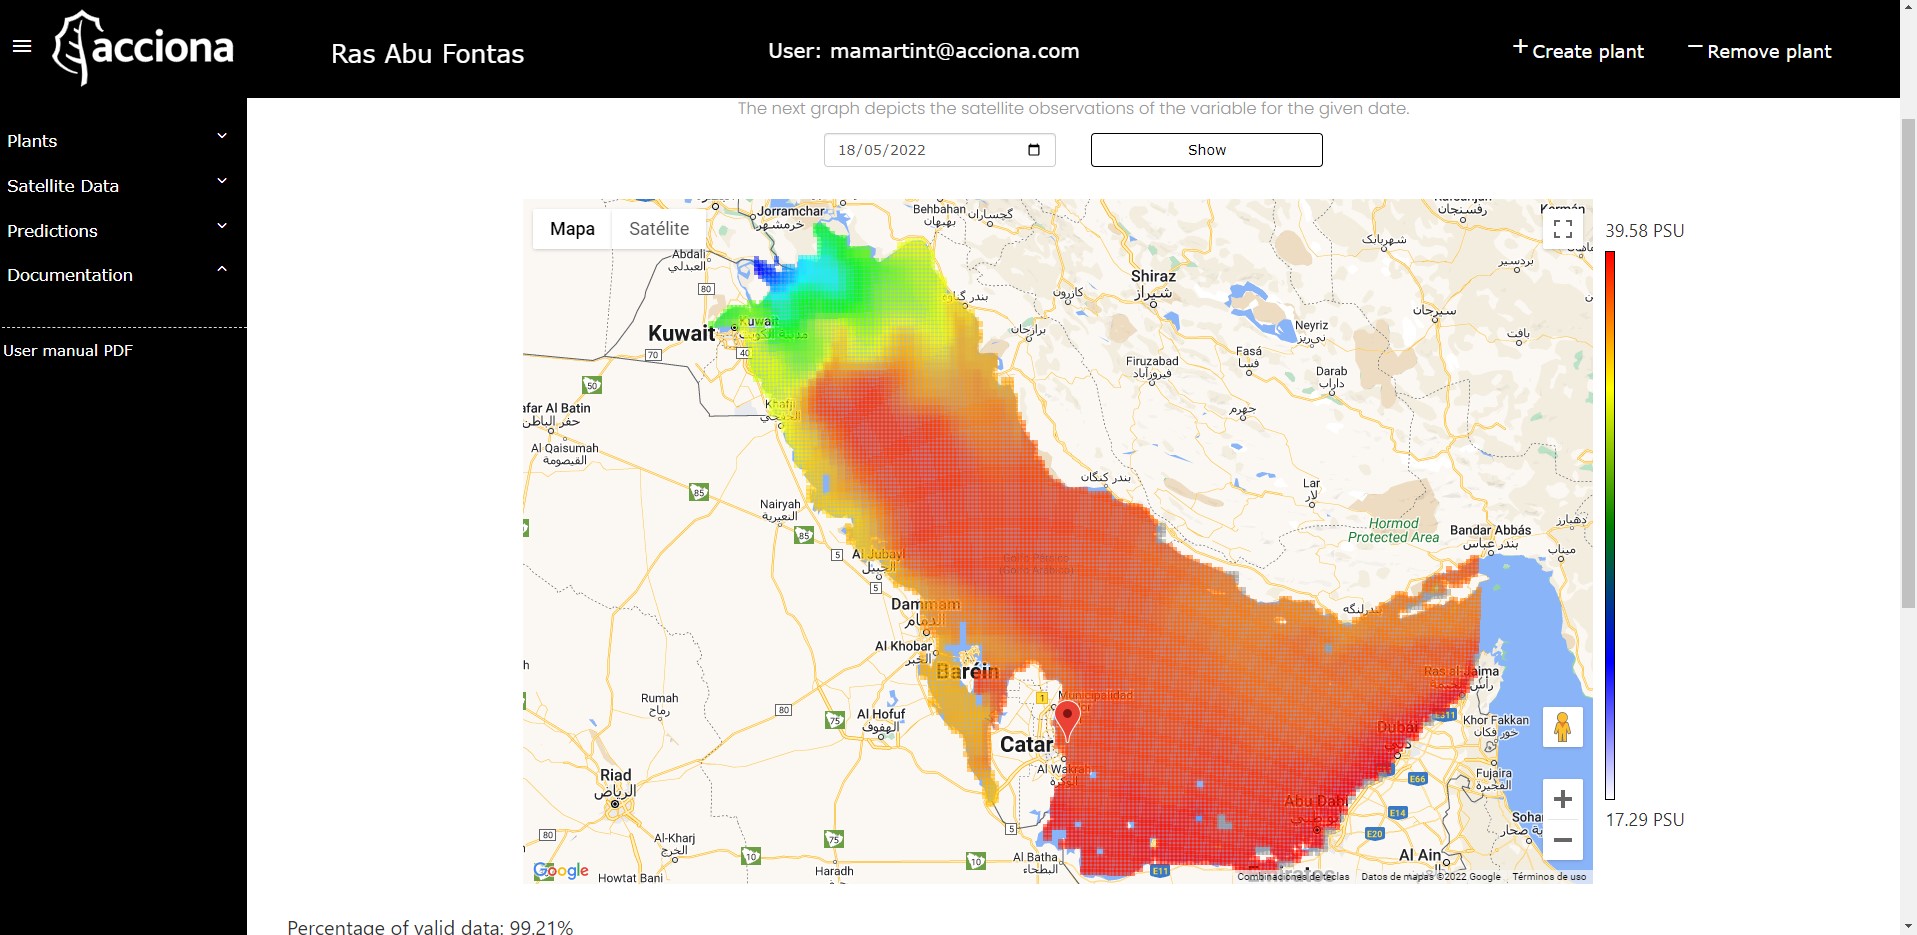 ACCIONA DEPLOYS SATELLITES TO FORECAST SEAWATER QUALITY FOR DESALINATION PLANTS IN THE MIDDLE EAST